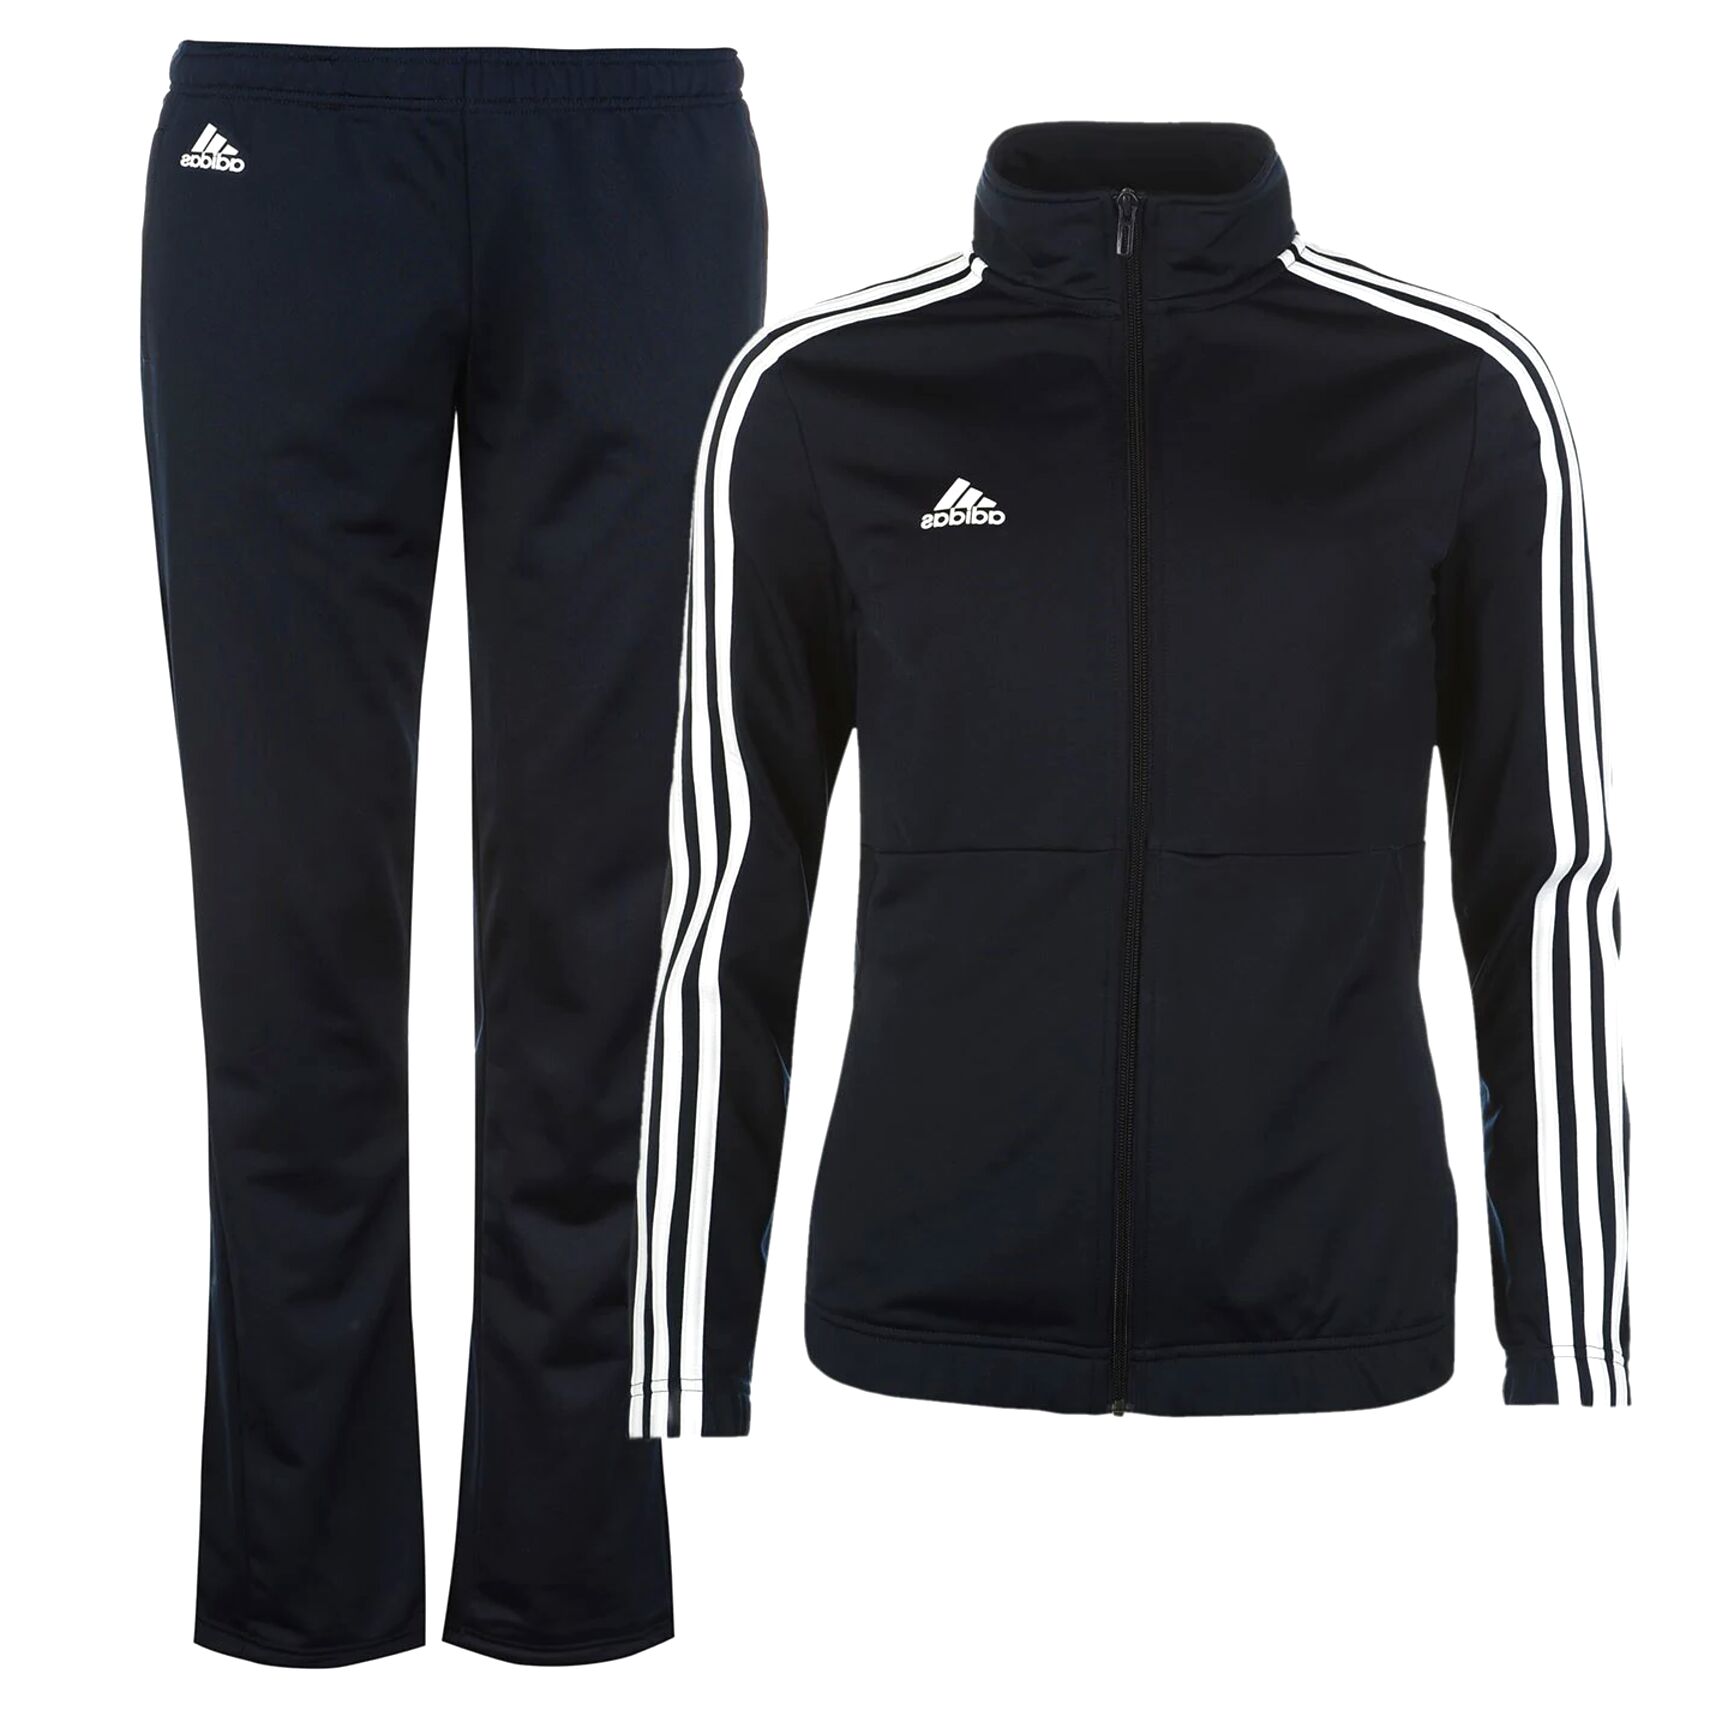 Adidas Tracksuit for sale in UK | 53 used Adidas Tracksuits